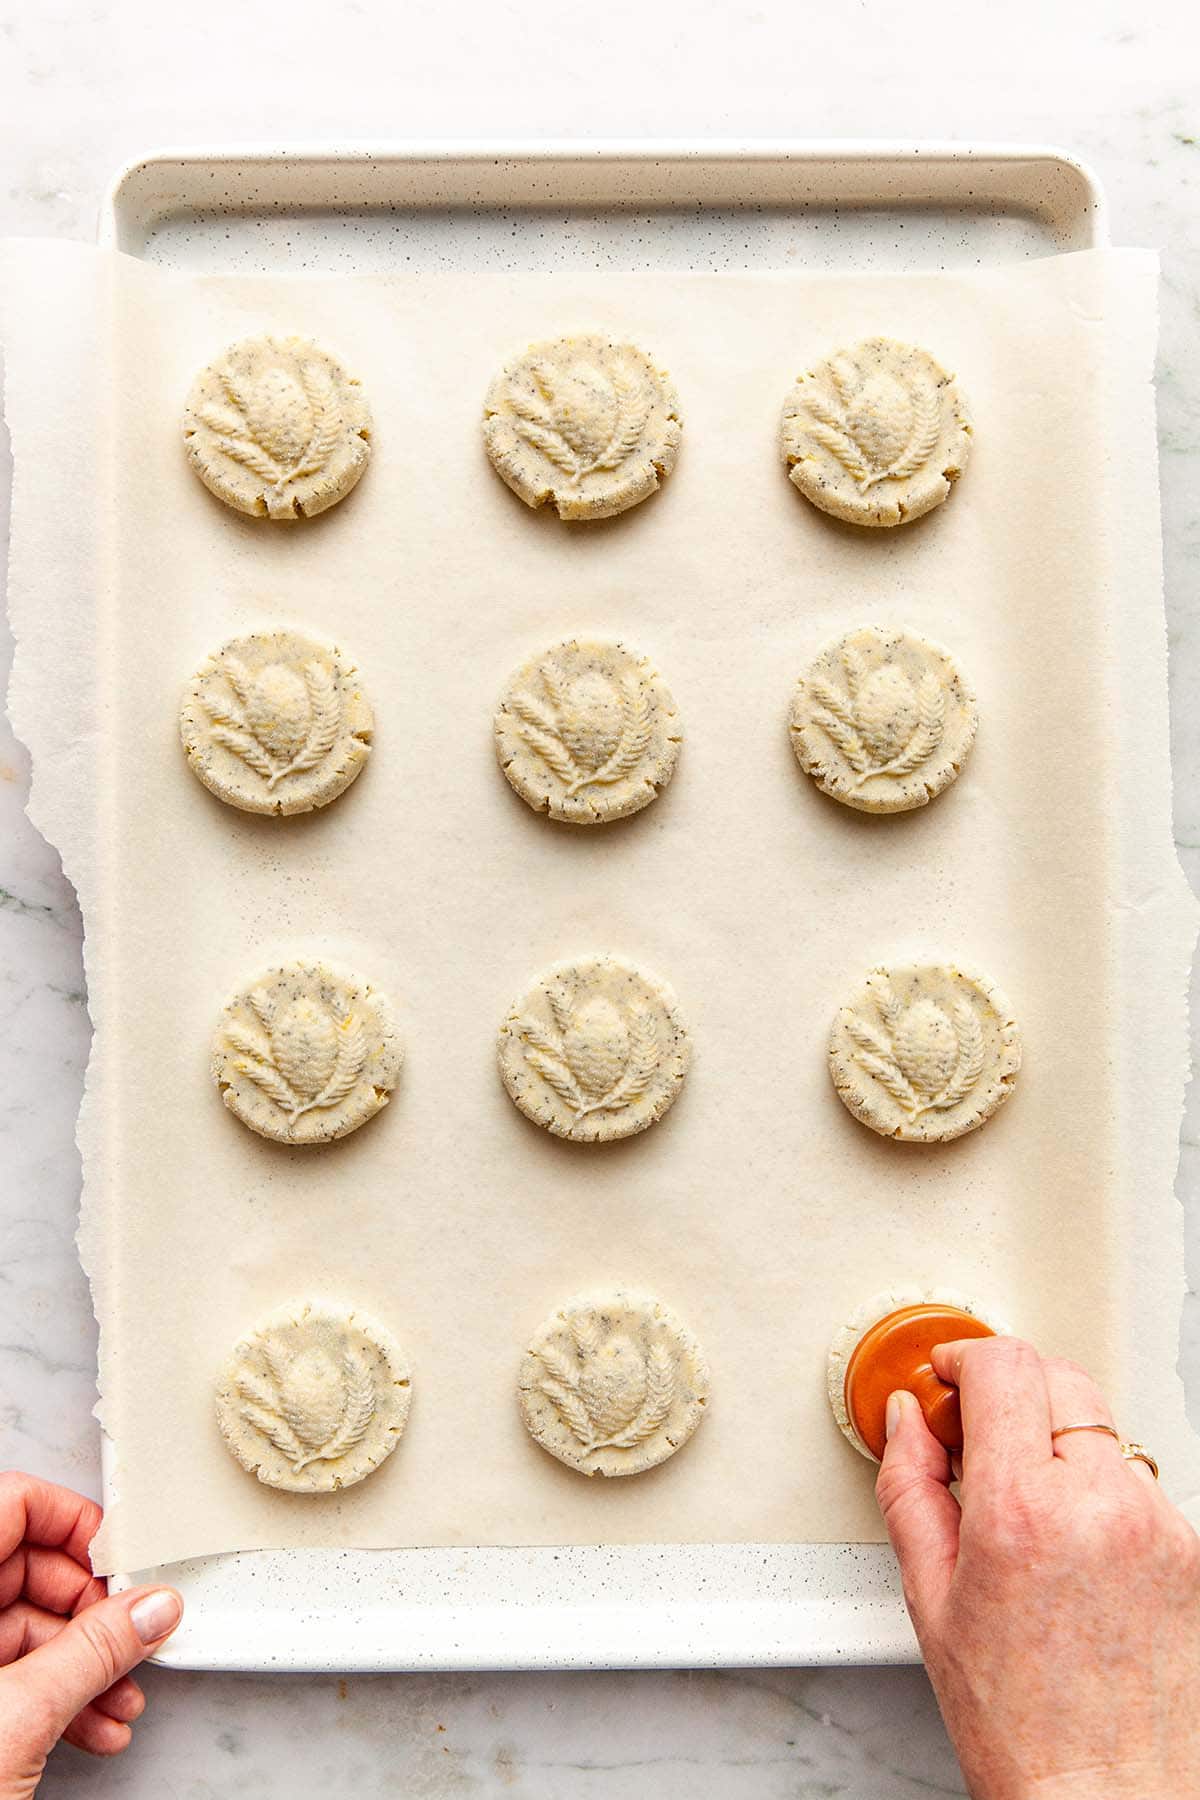 A hand stamping a tray of unbaked cookies with a ceramic stamp.